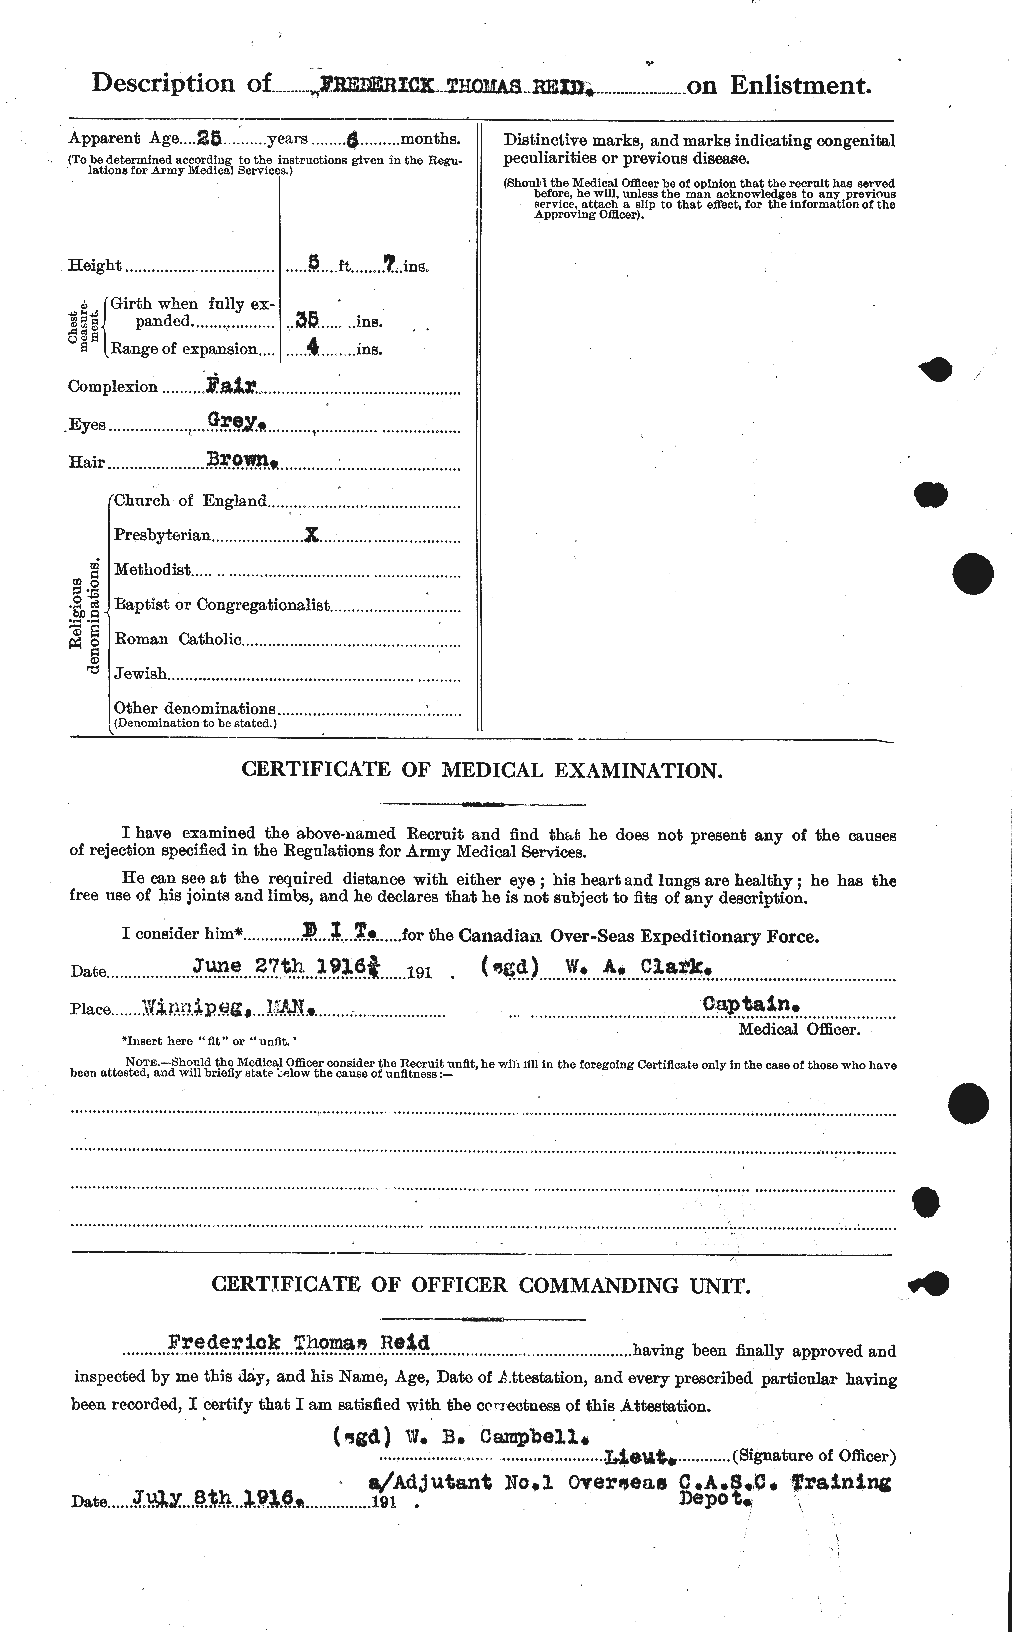 Personnel Records of the First World War - CEF 598074b